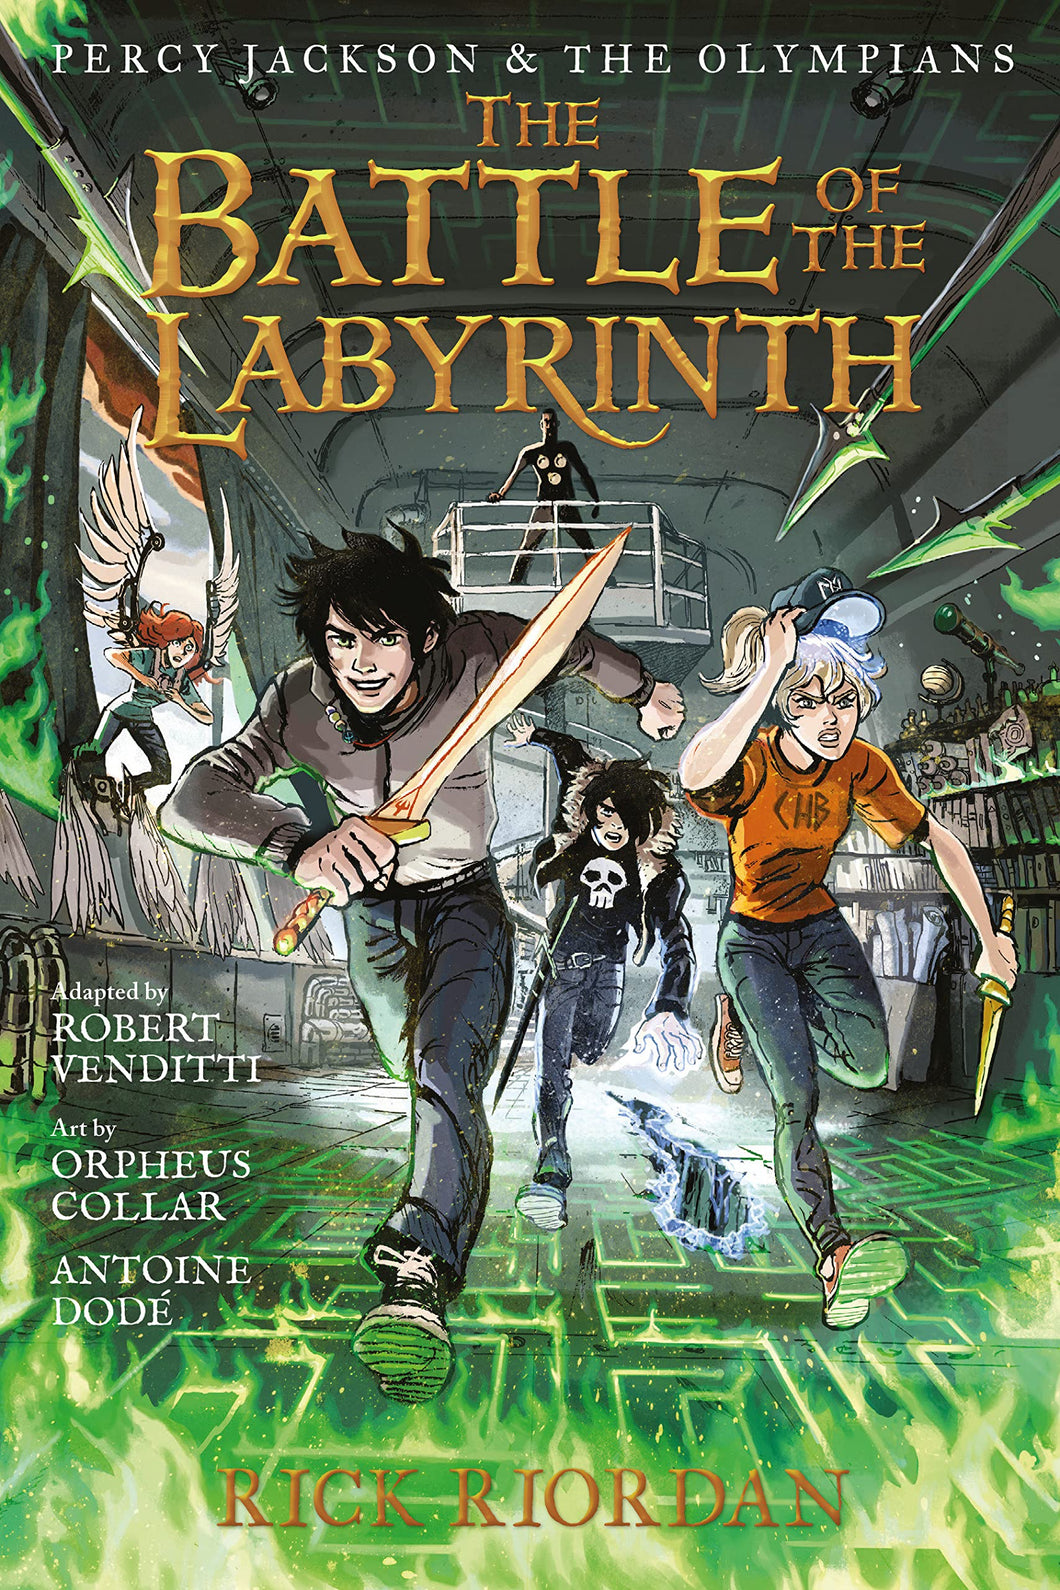 The Battle of the Labyrith: The Graphic Novel (Percy Jackson & the Olympians, Book 4)